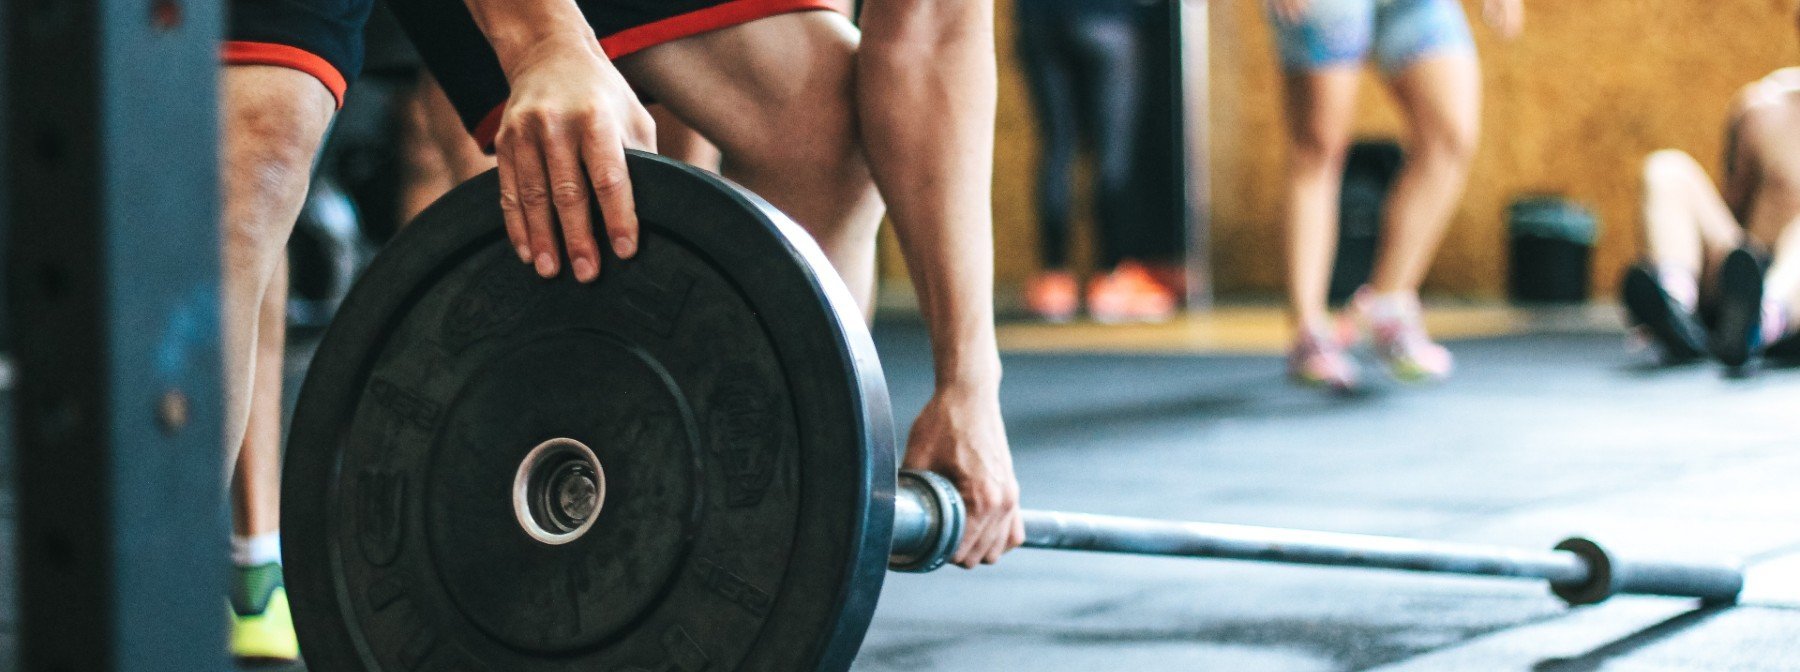 Can You Build Muscle With Just A Barbell? The Only Equipment You’ll Need For The Gym